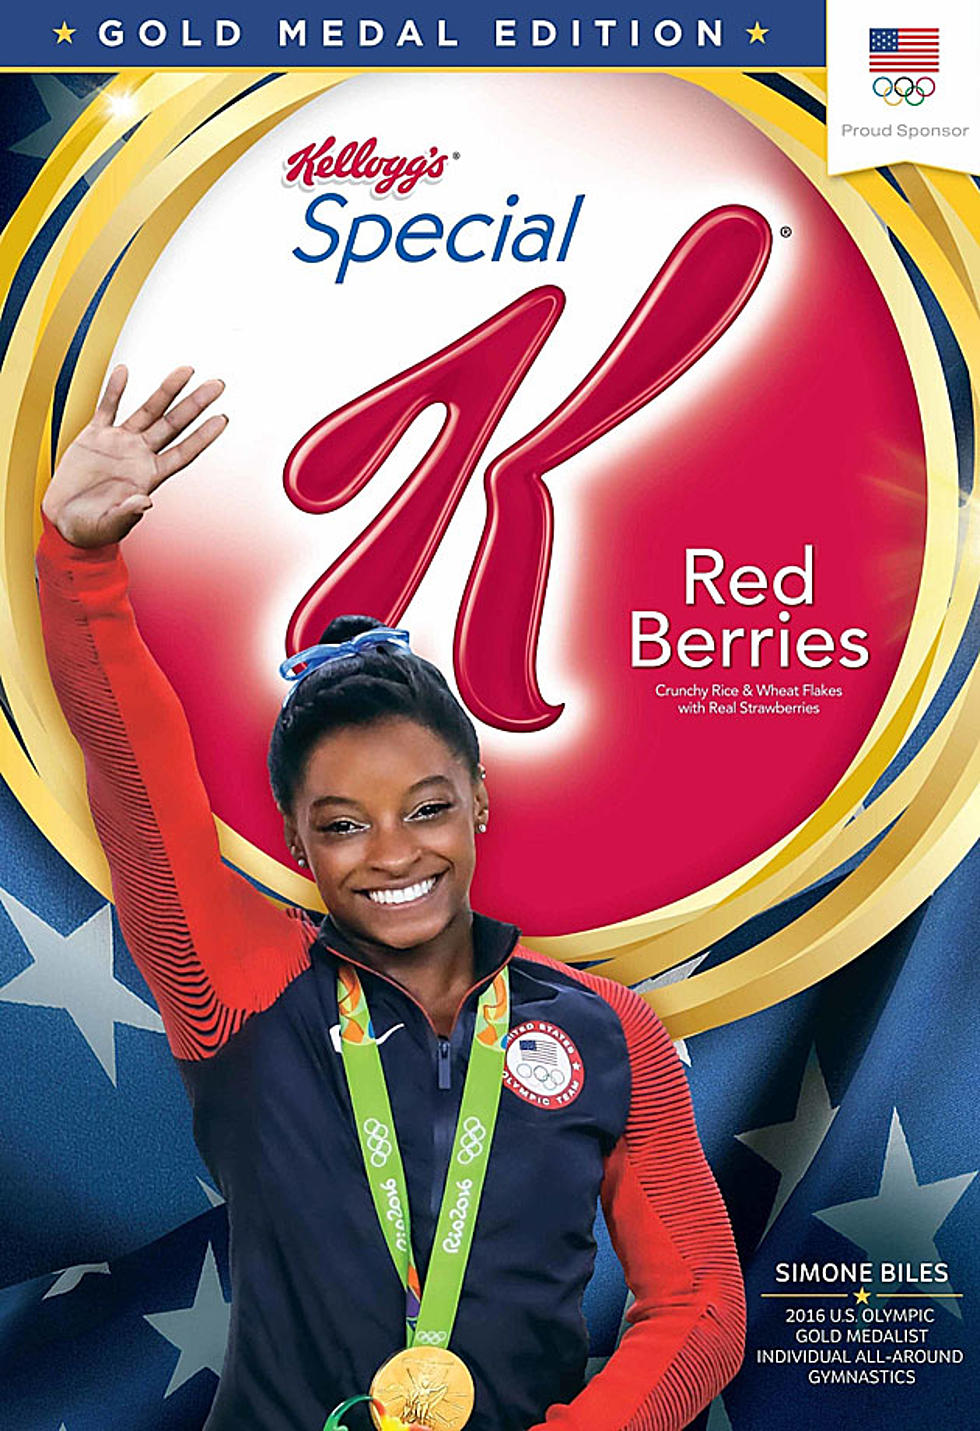 Gold Medal Olympians to Appear on Special K Boxes